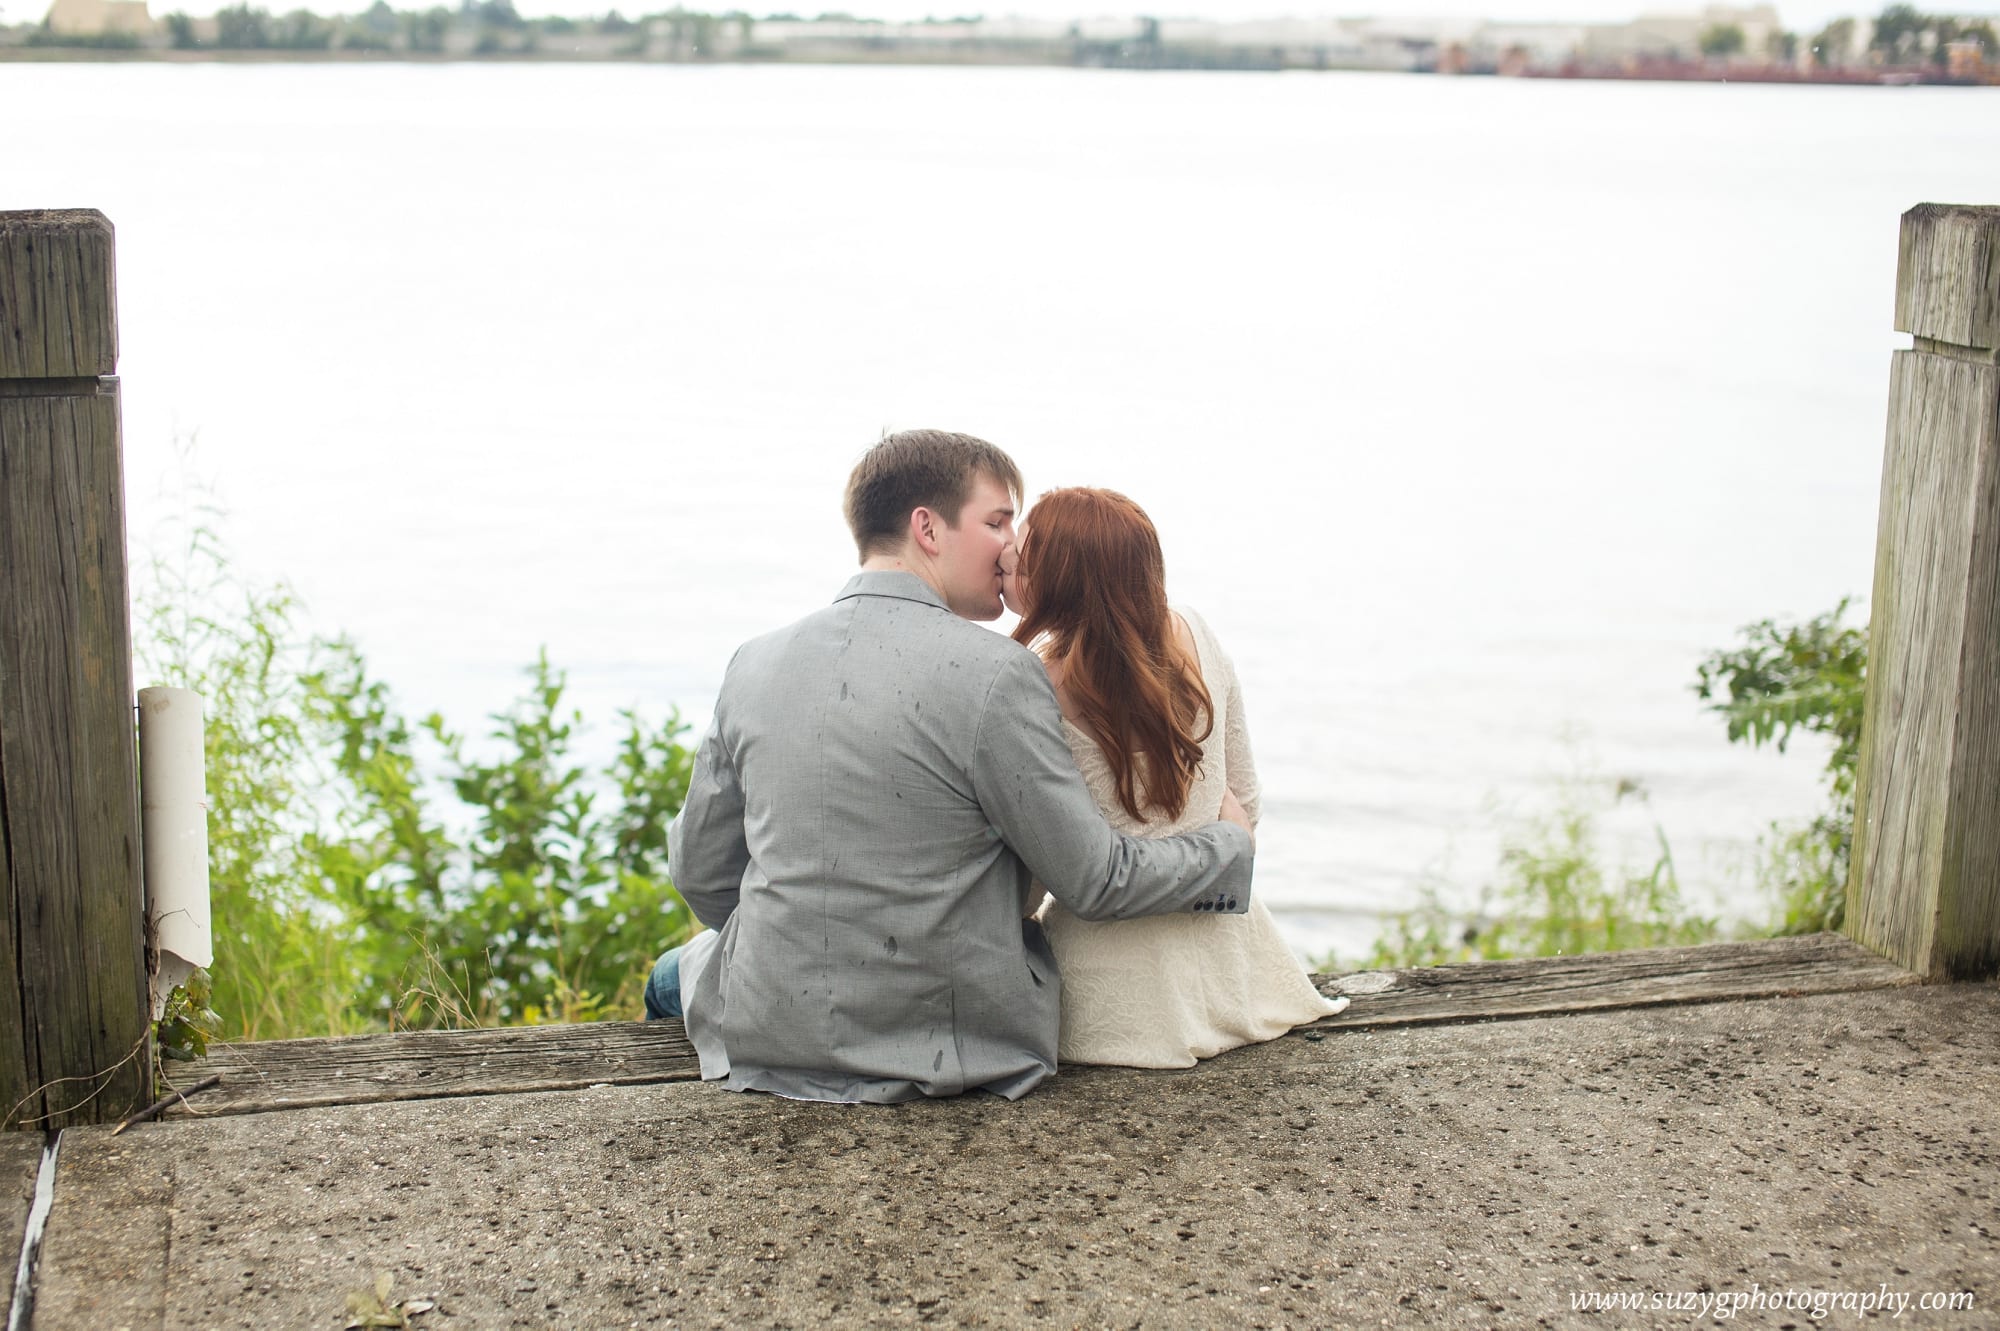 engagements-new orleans-texas-baton rouge-lake charles-suzy g-photography-suzygphotography_0138